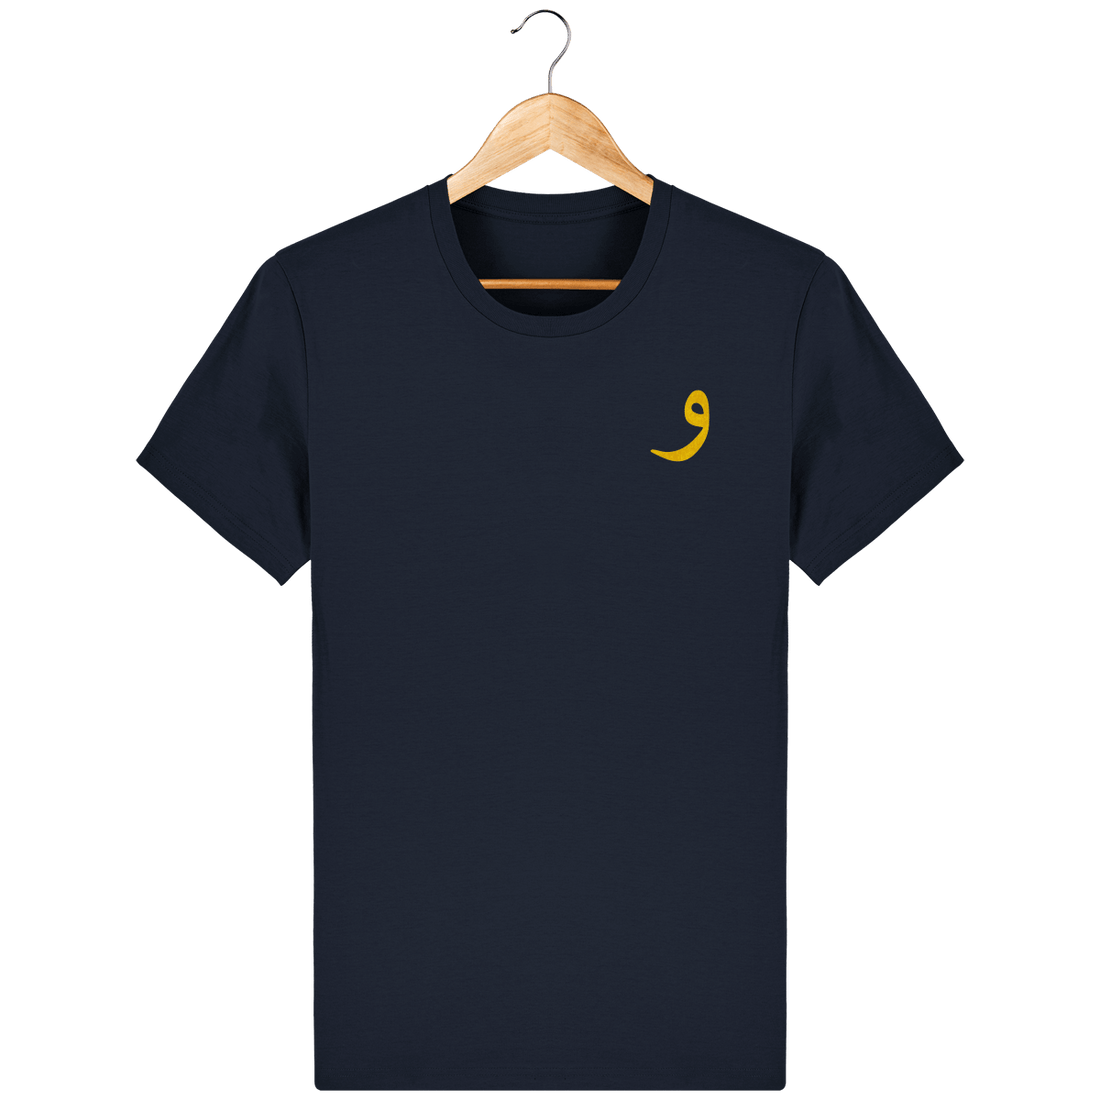 Unisexe>Tee-shirts - T-Shirt Homme <br>  Lettre Arabe Waaw